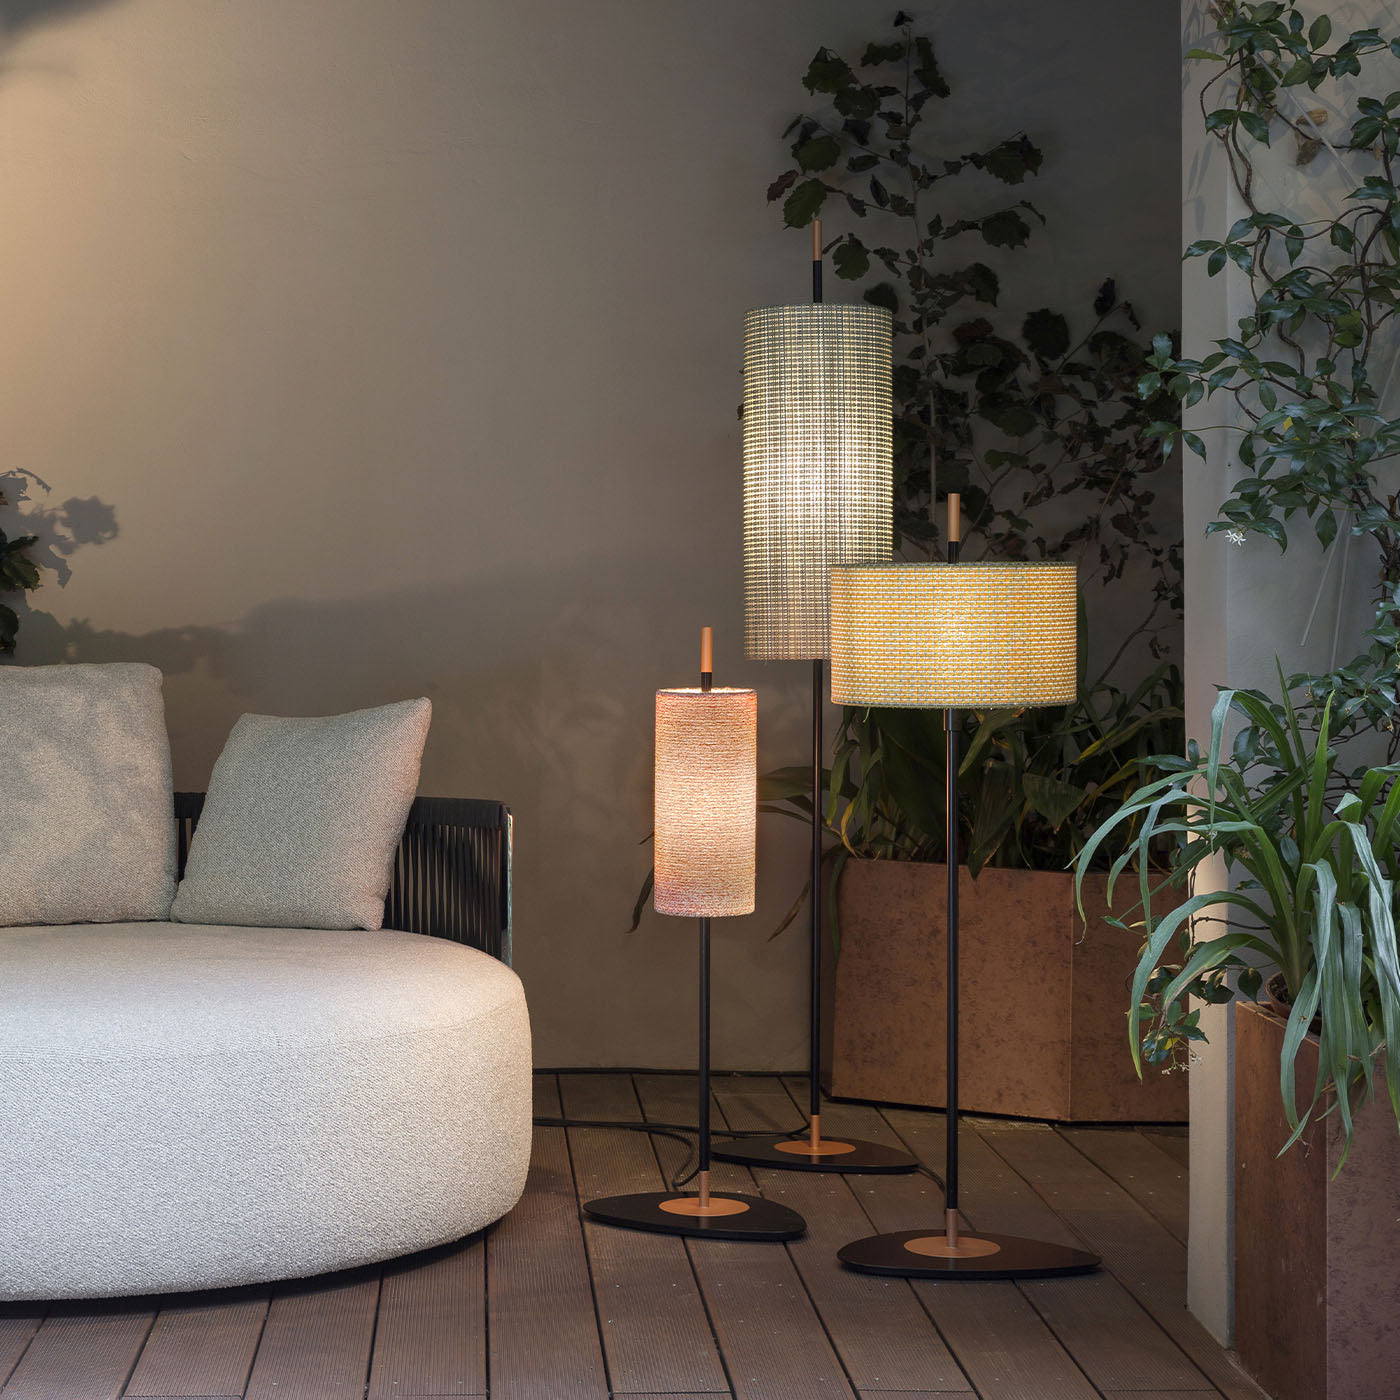 Lagoon Noumea Goyave Small Outdoor Floor Lamp by Servomuto - Alternative view 3